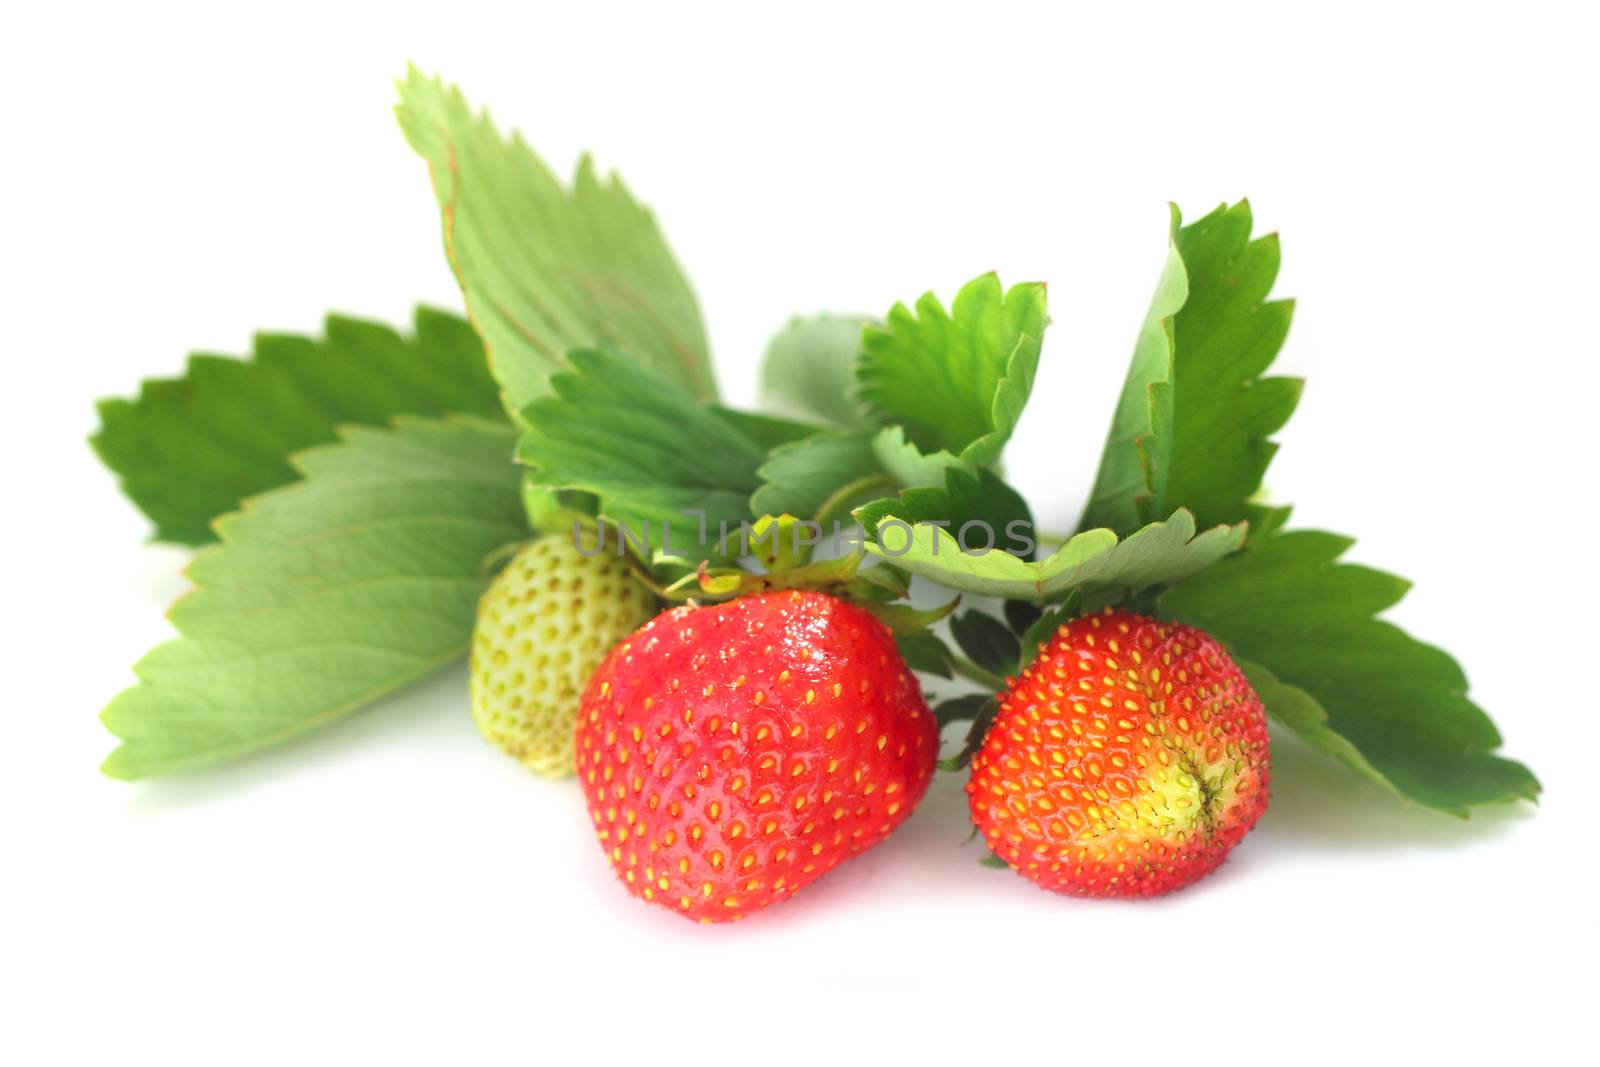 Strawberry with leaves by destillat